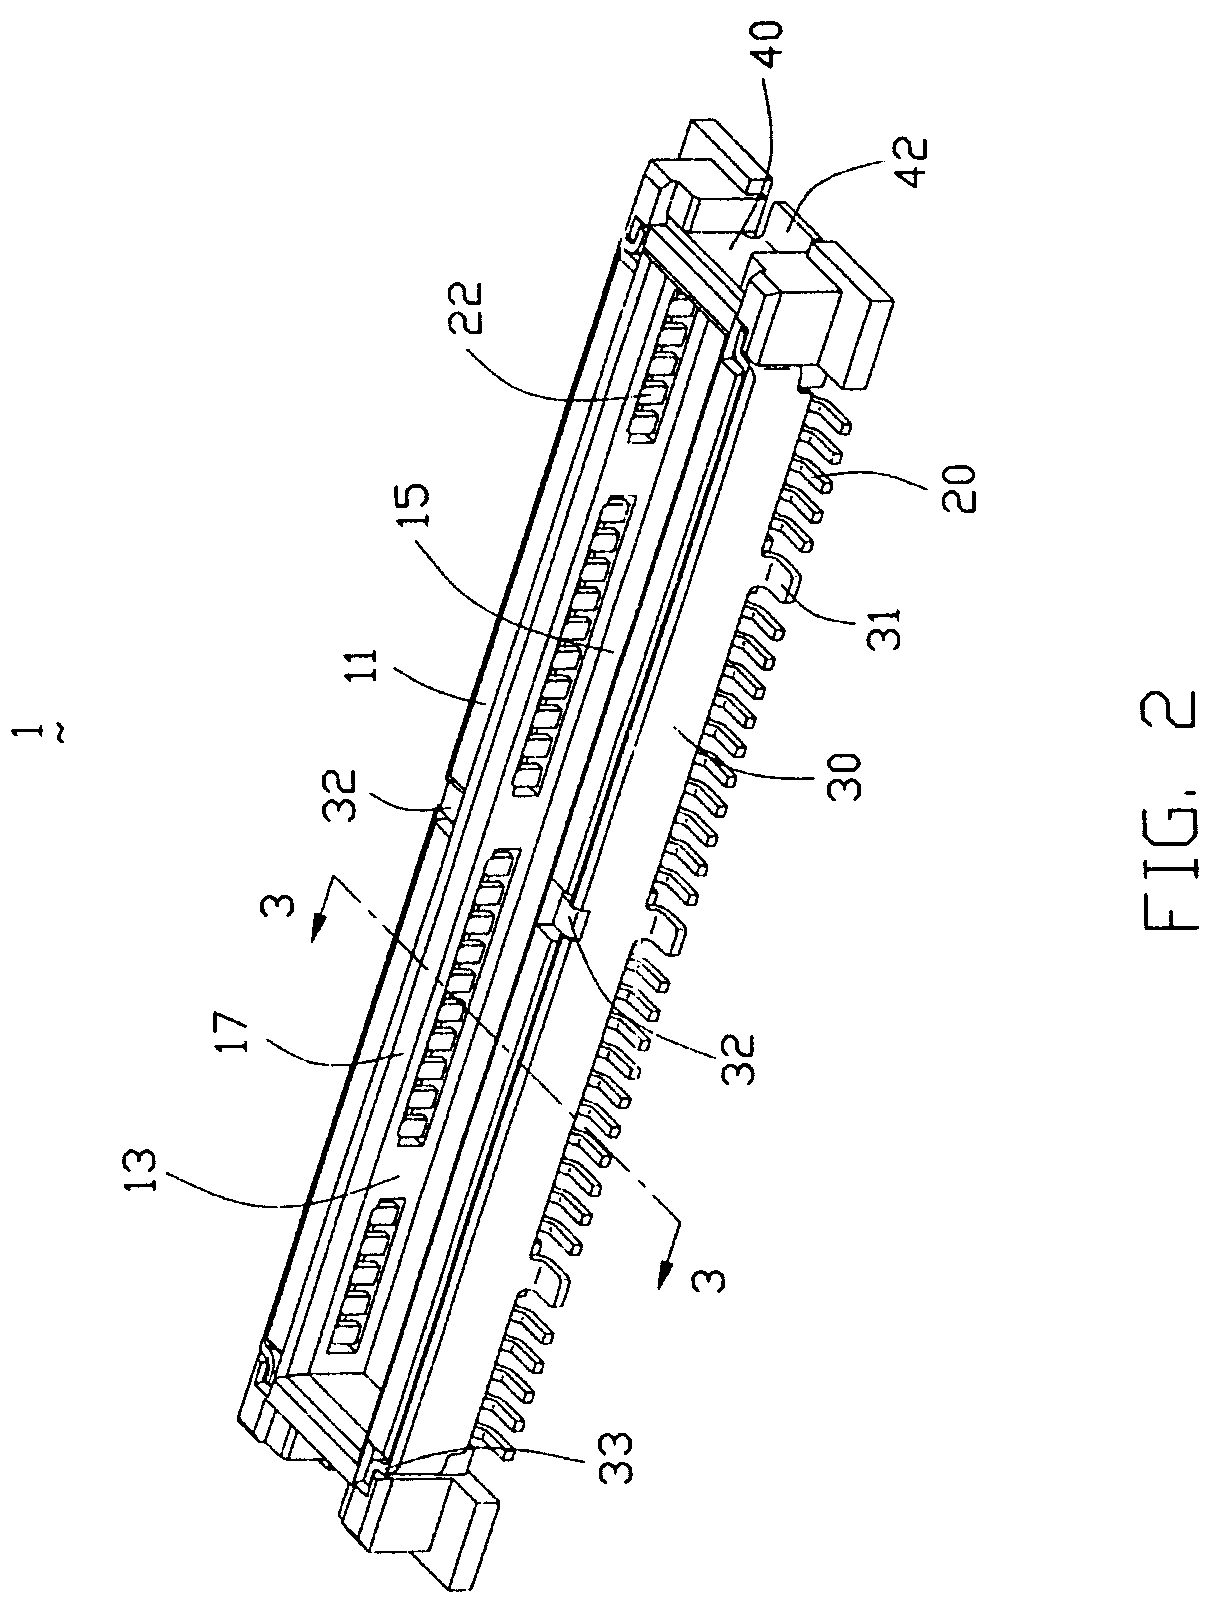 Electrical connector with guidance face